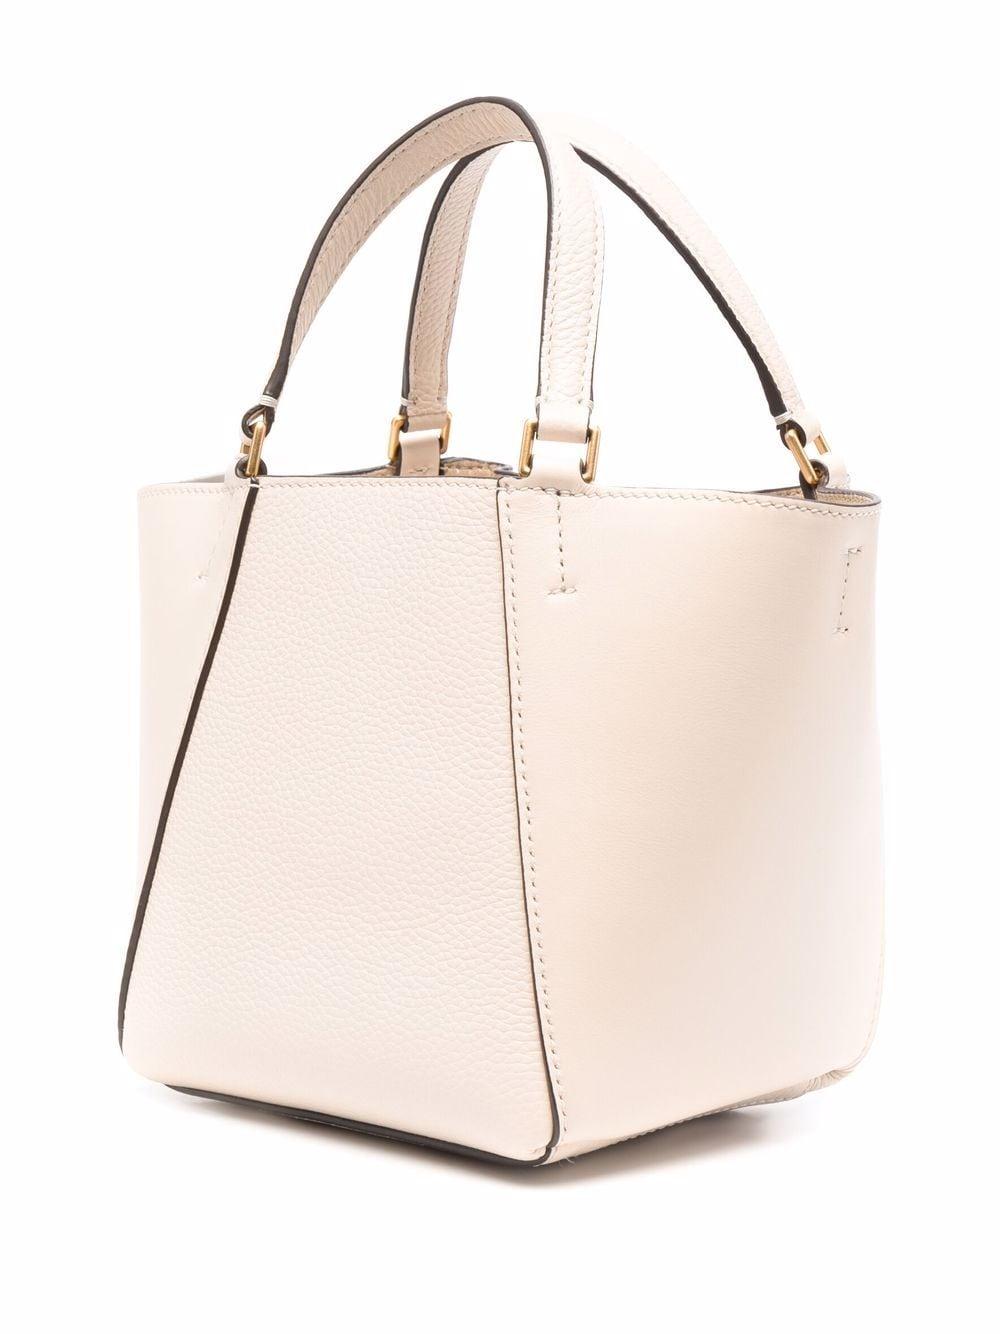 Tory Burch Leather Mini Mcgraw Dragonfly Tote Bag in Natural | Lyst